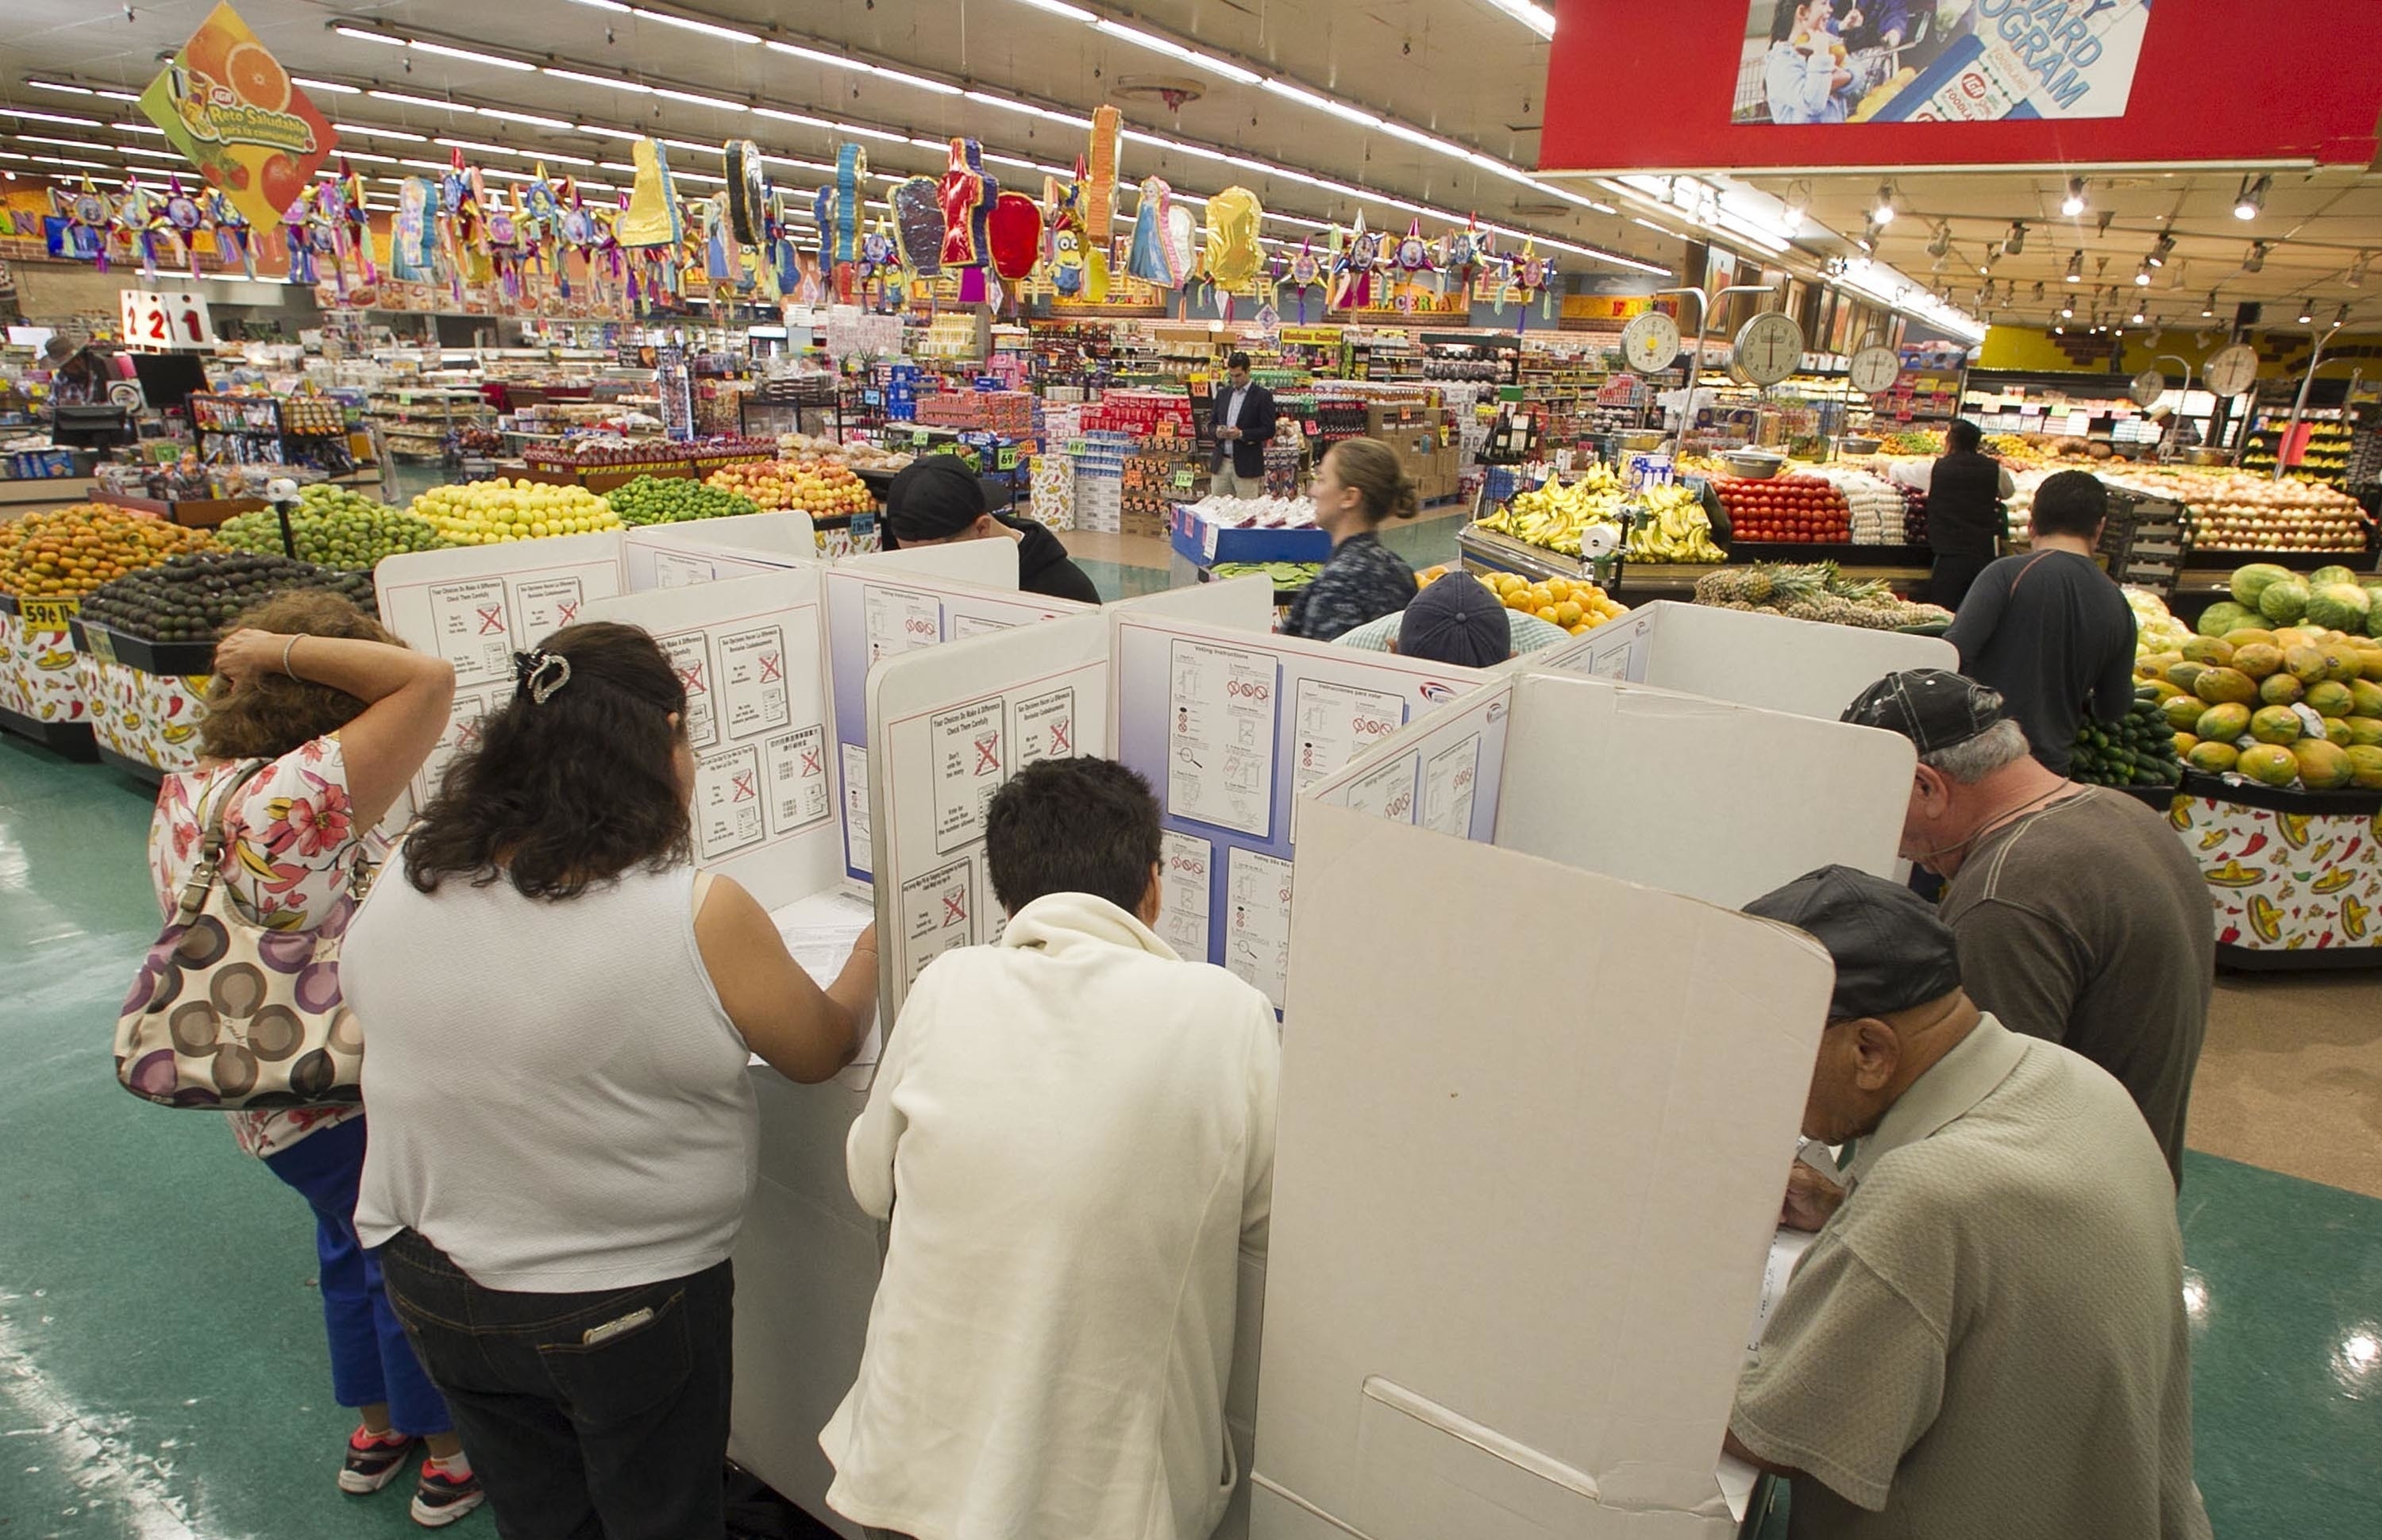 Voters cast their ballots on Election Day at the Foodland Grocery Store and Mercado in National City section in San Diego on Tuesday, Nov. 8, 2016.    (John Gibbins/The San Diego Union-Tribune via AP)